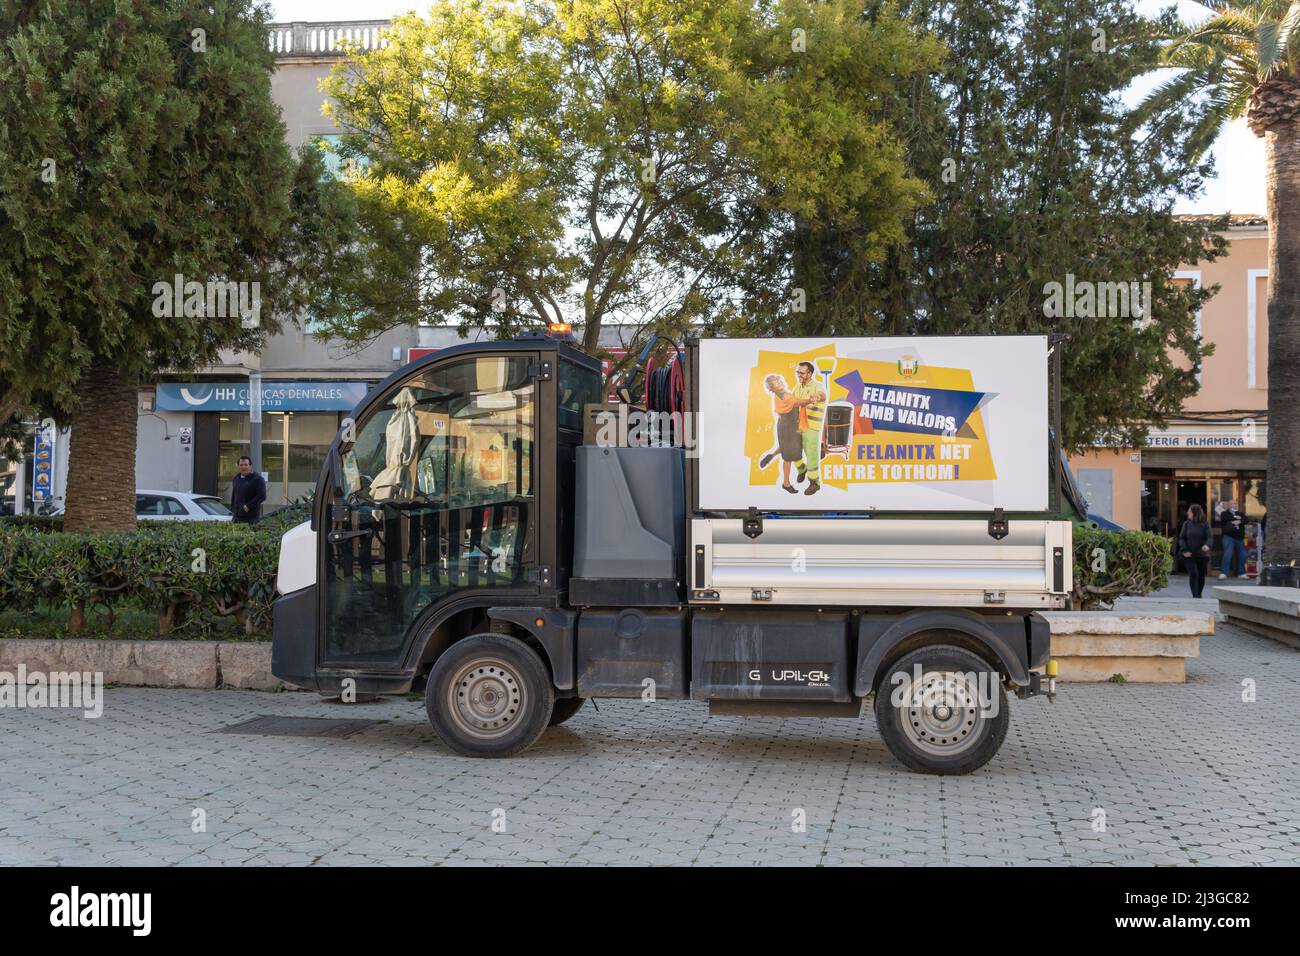 Felanitx, Spain; april 01 2022: Mobile maintenance and cleaning unit of the Mallorcan town of Felanitx, parked in a central square. Spain Stock Photo